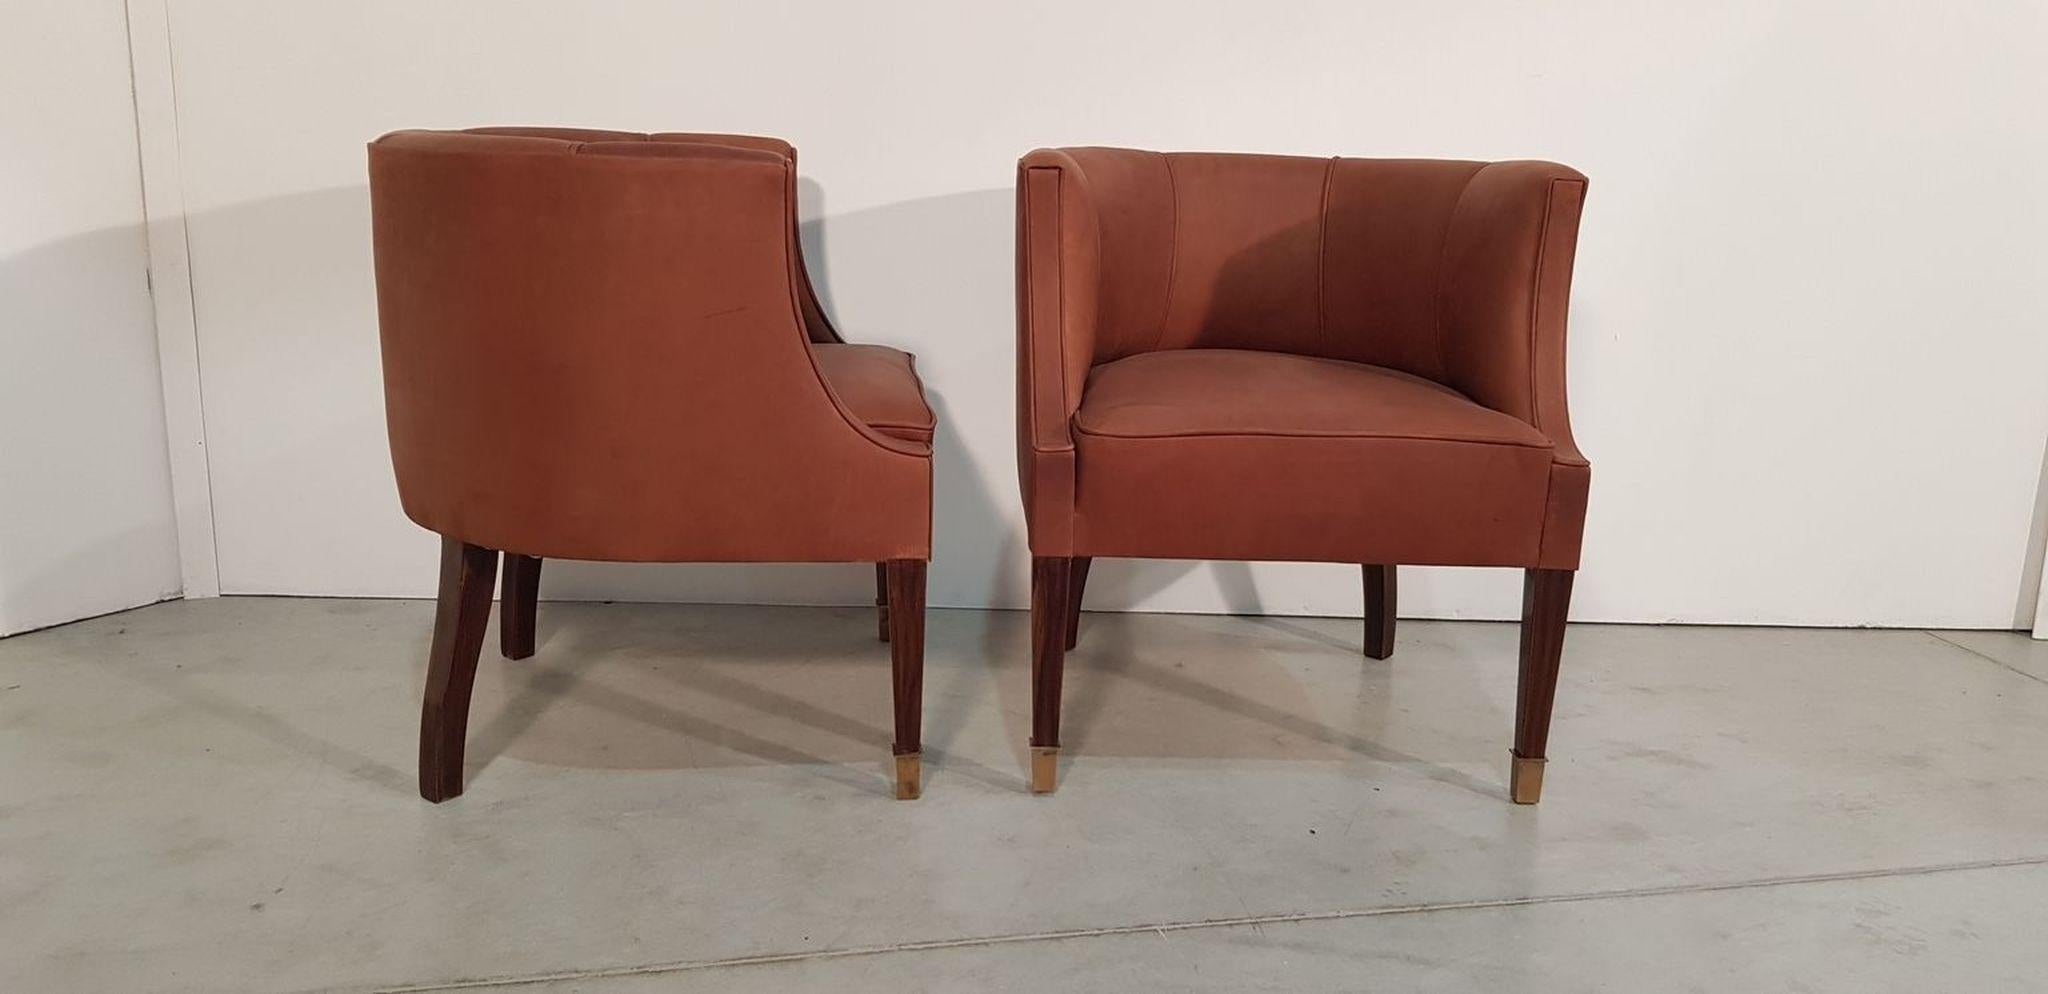 Pair of Art Deco Armchairs on Walnut Legs Covered Brown Leather, Hungary, 1930s For Sale 3